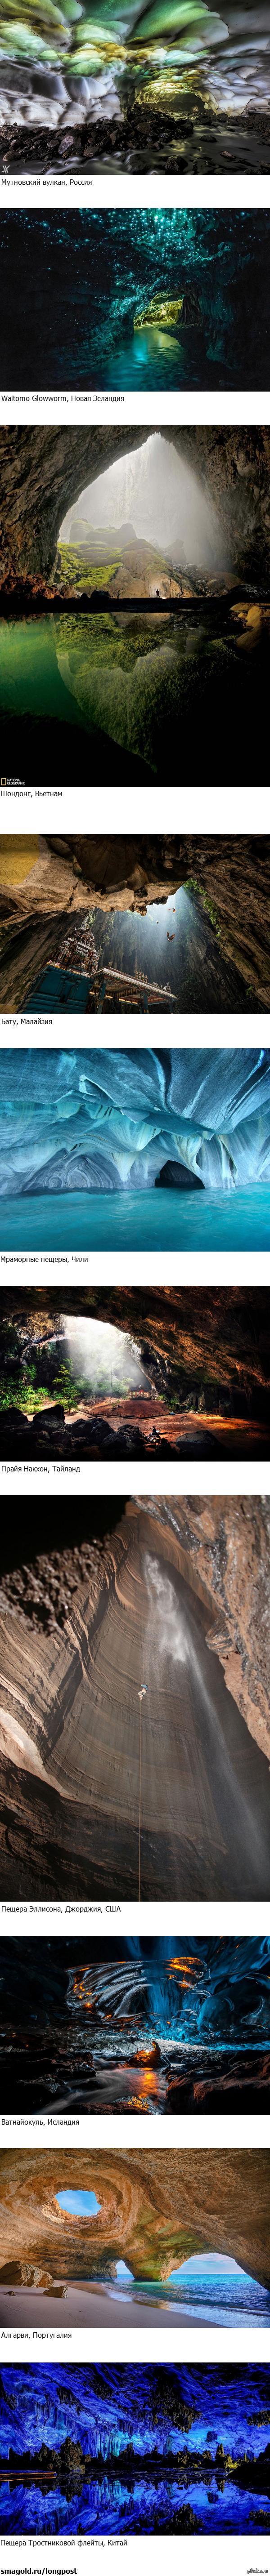 10       : http://curioushistory.com/post/69550437037/10-most-majestic-caves-in-world#.Ute_P9JdXA1